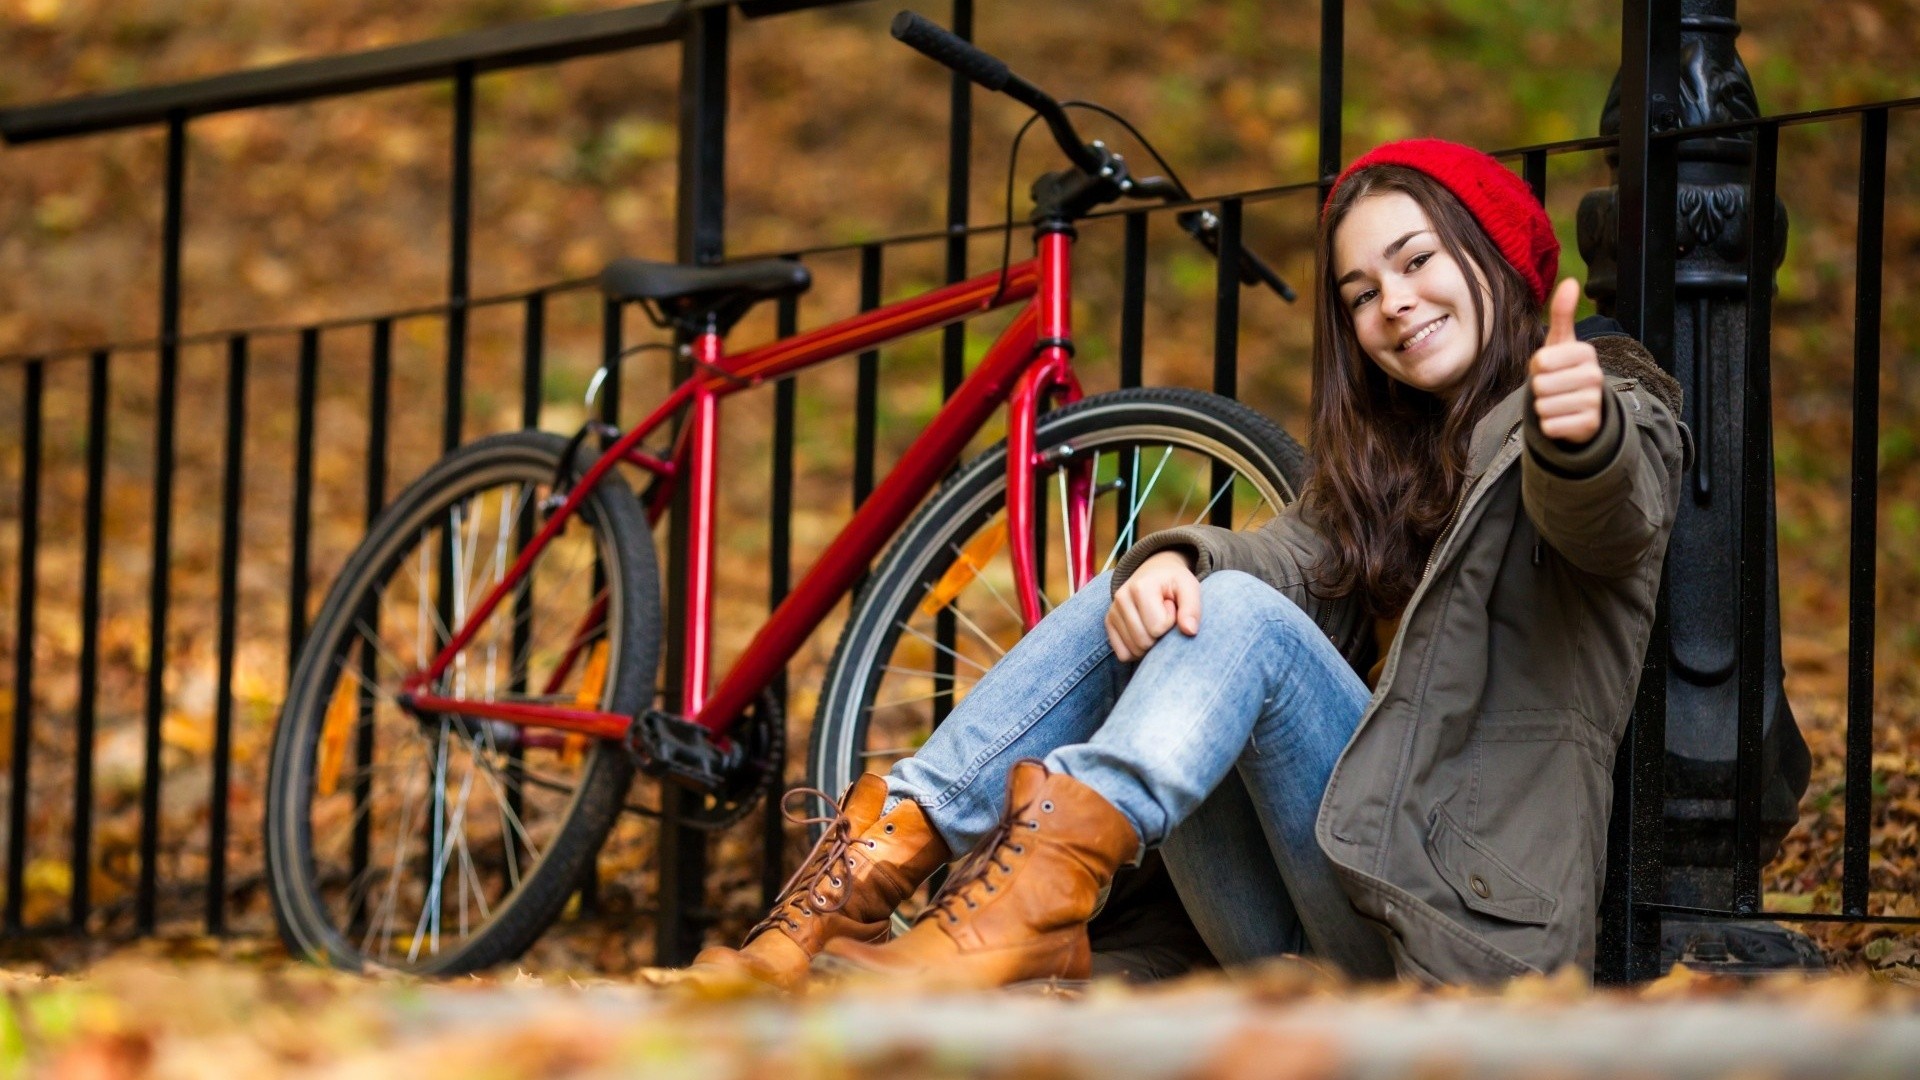 Wallpaper, fall, leaves, people, women outdoors, model, long hair, brunette, bicycle, hat, sitting, vehicle, smiling, coats, jeans, fence, boots, beanie, autumn, cyclo cross, sports equipment, mountain bike 1920x1080